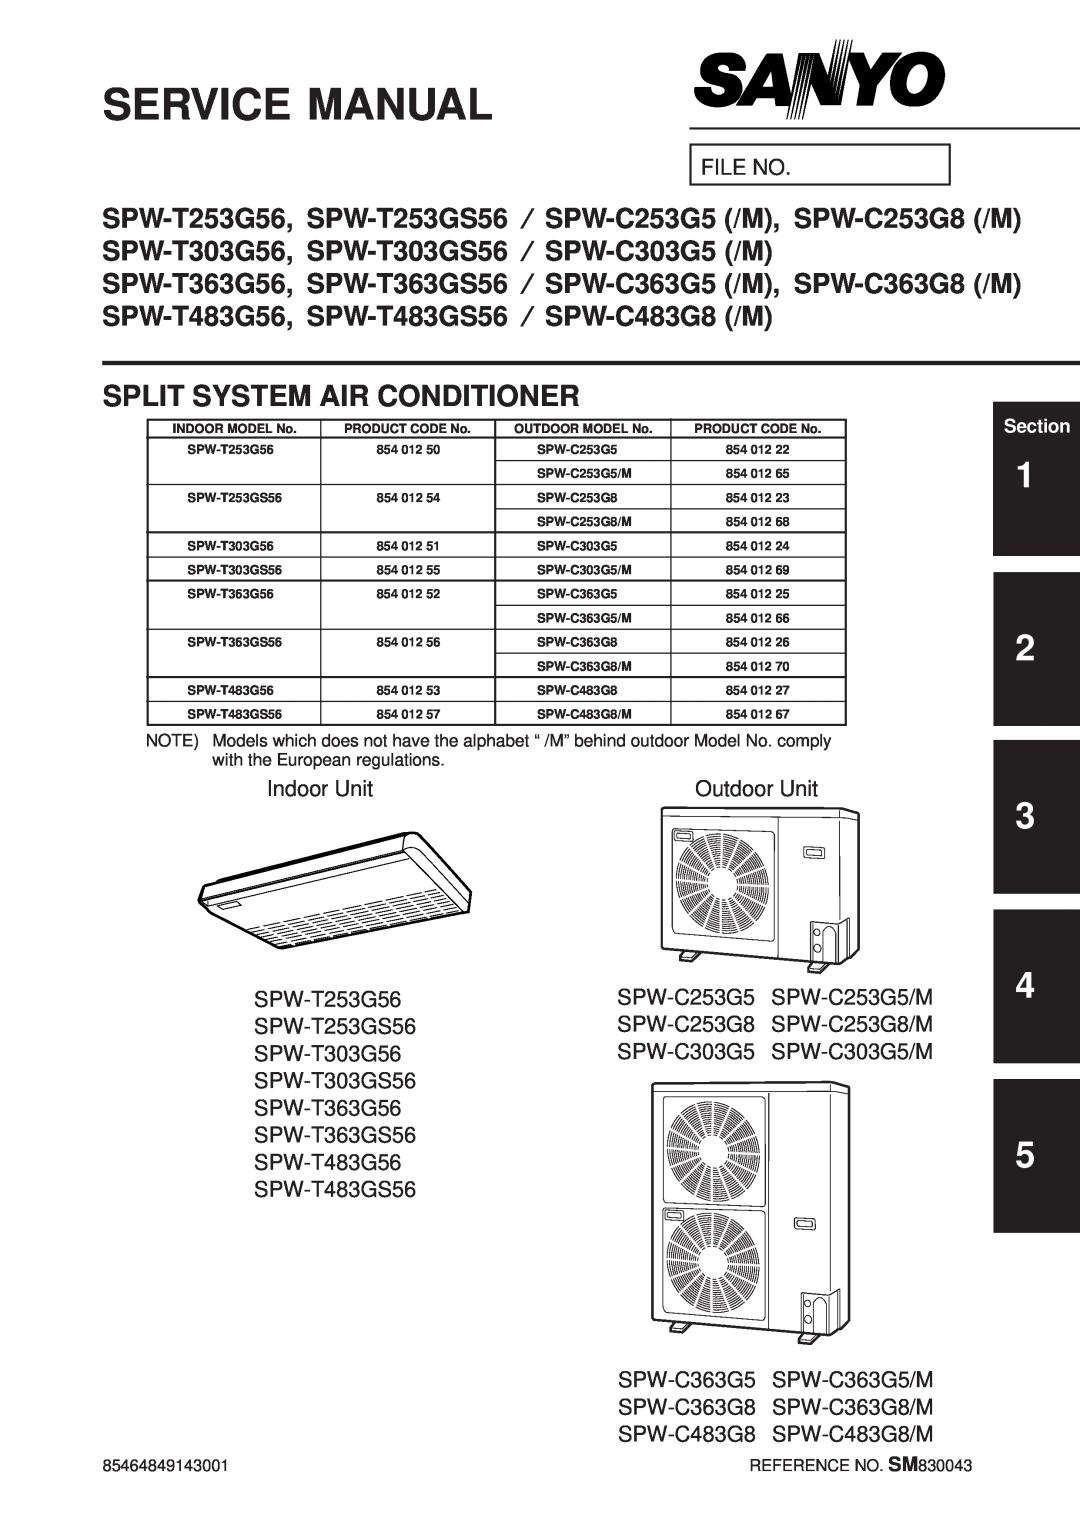 Sanyo SPW-T483G56, SPW-T363GS56, SPW-T483GS56, SPW-C363G8, SPW-T363G56, SPW-C253G5 service manual Split System Air Conditioner 